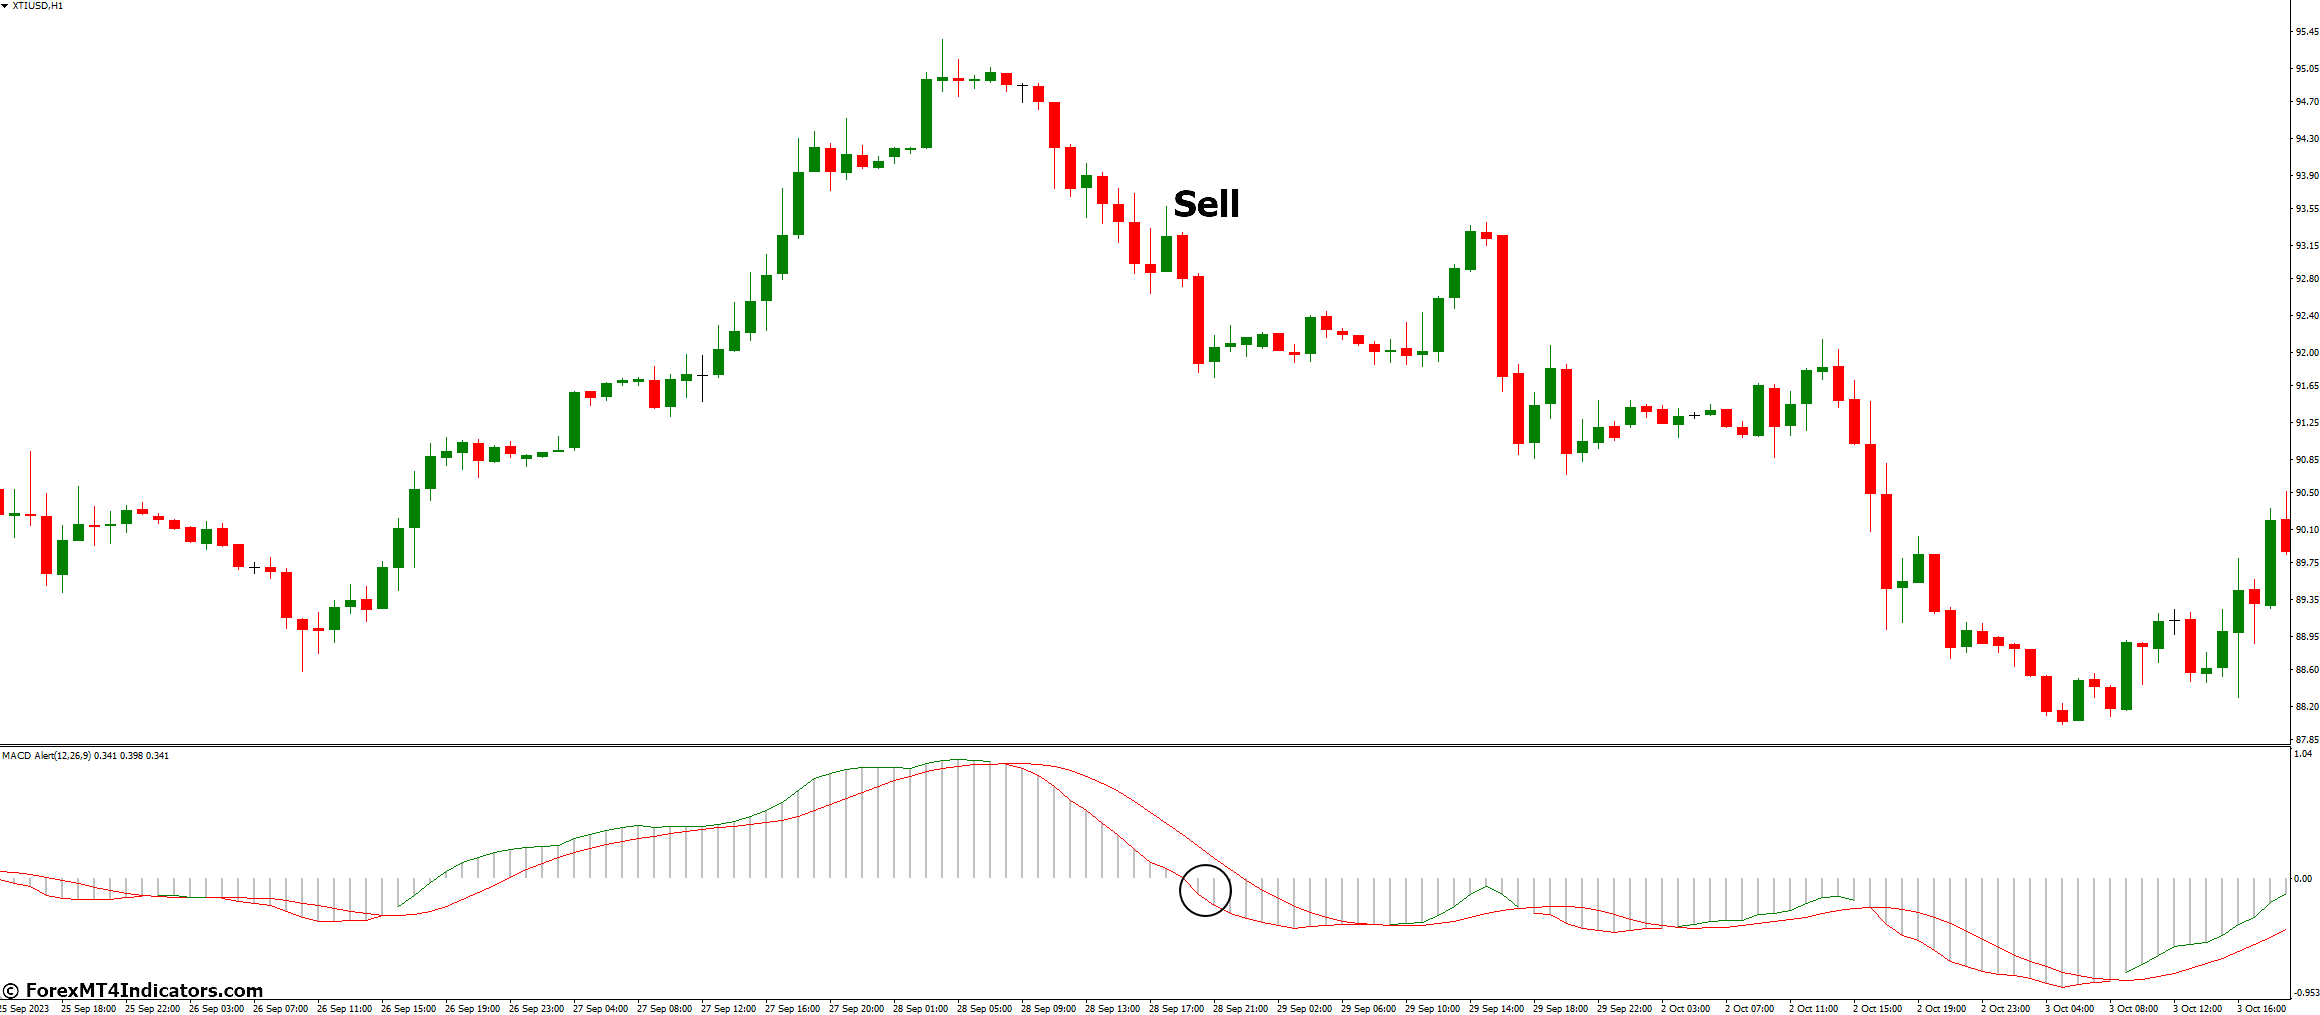 How to Trade with MACD Alert Indicator - Sell Entry